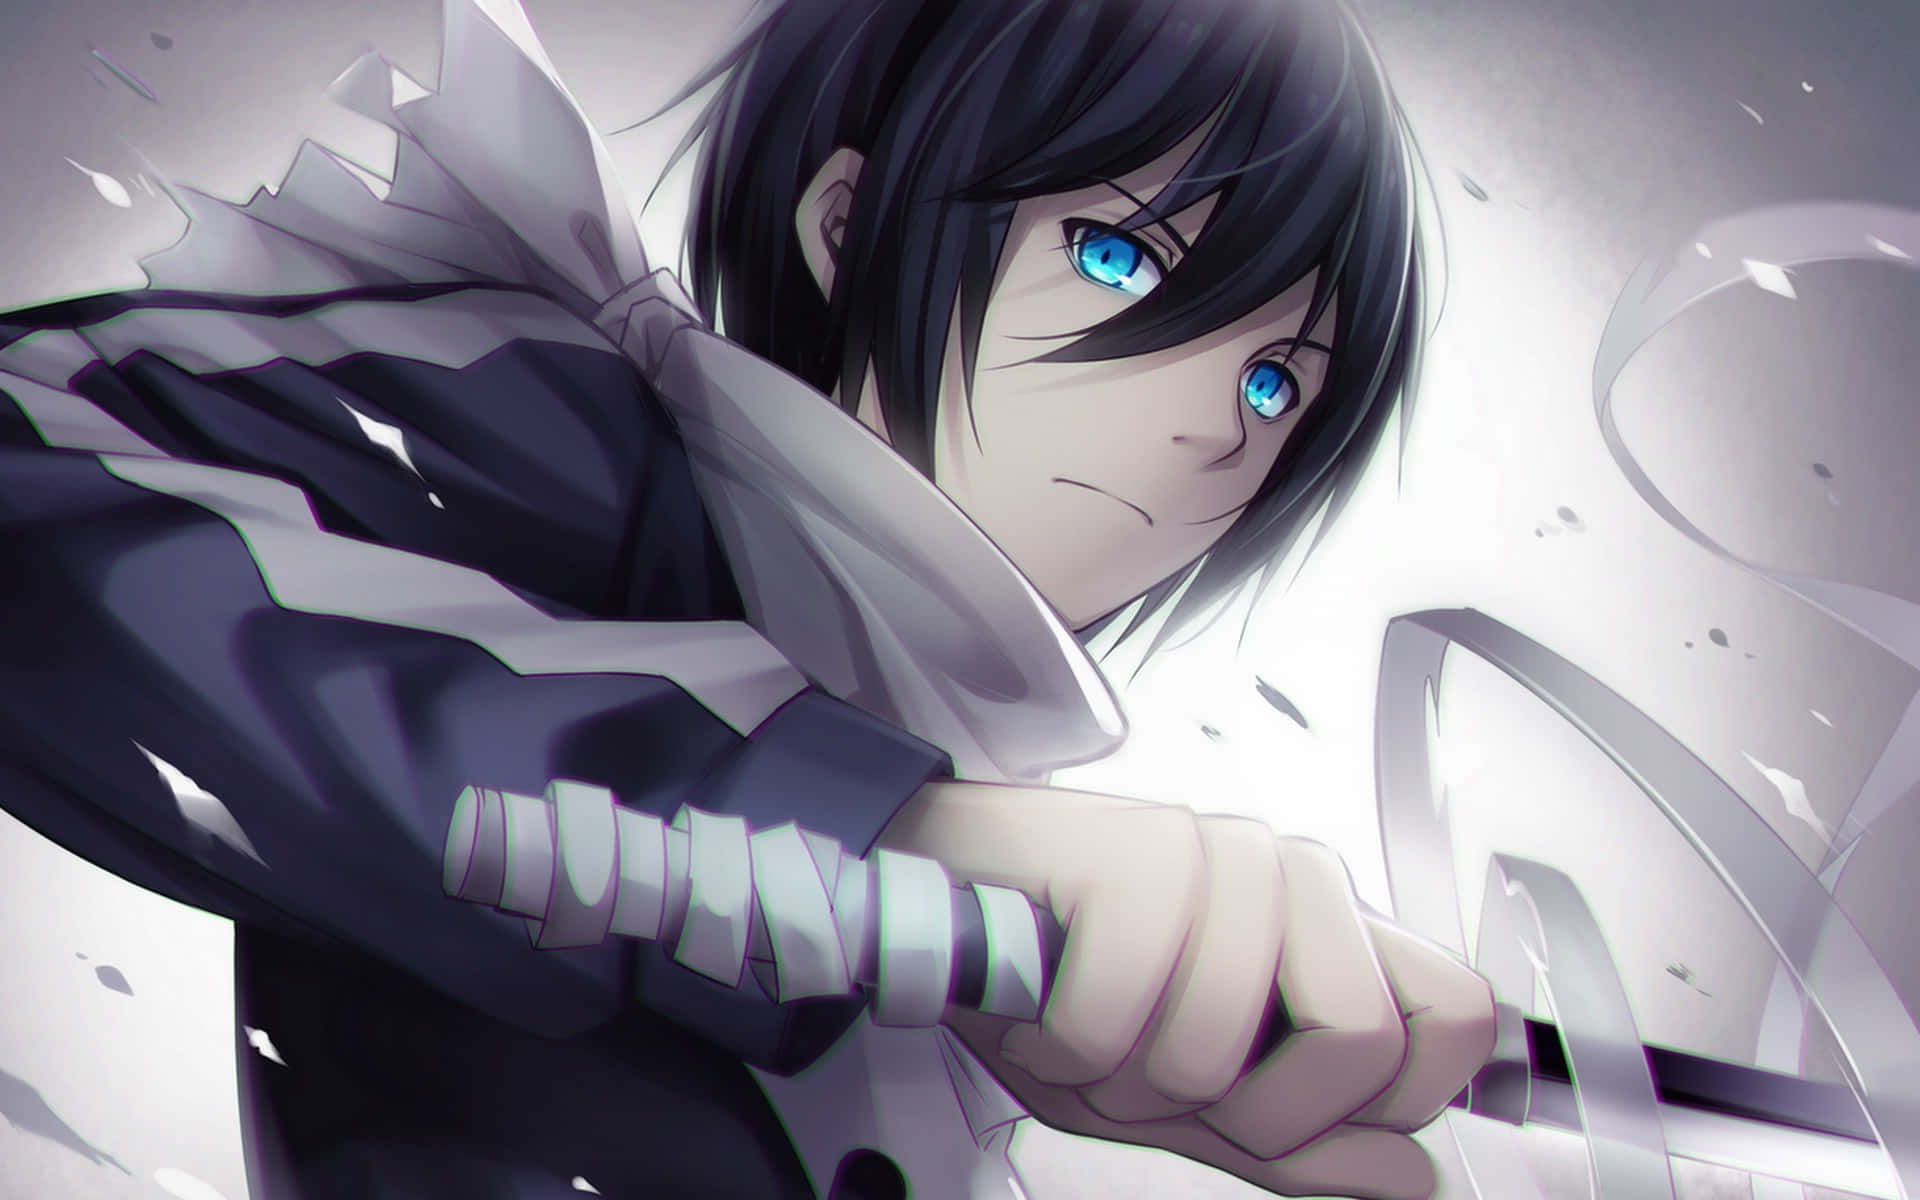 Follow the Path of Noragami!